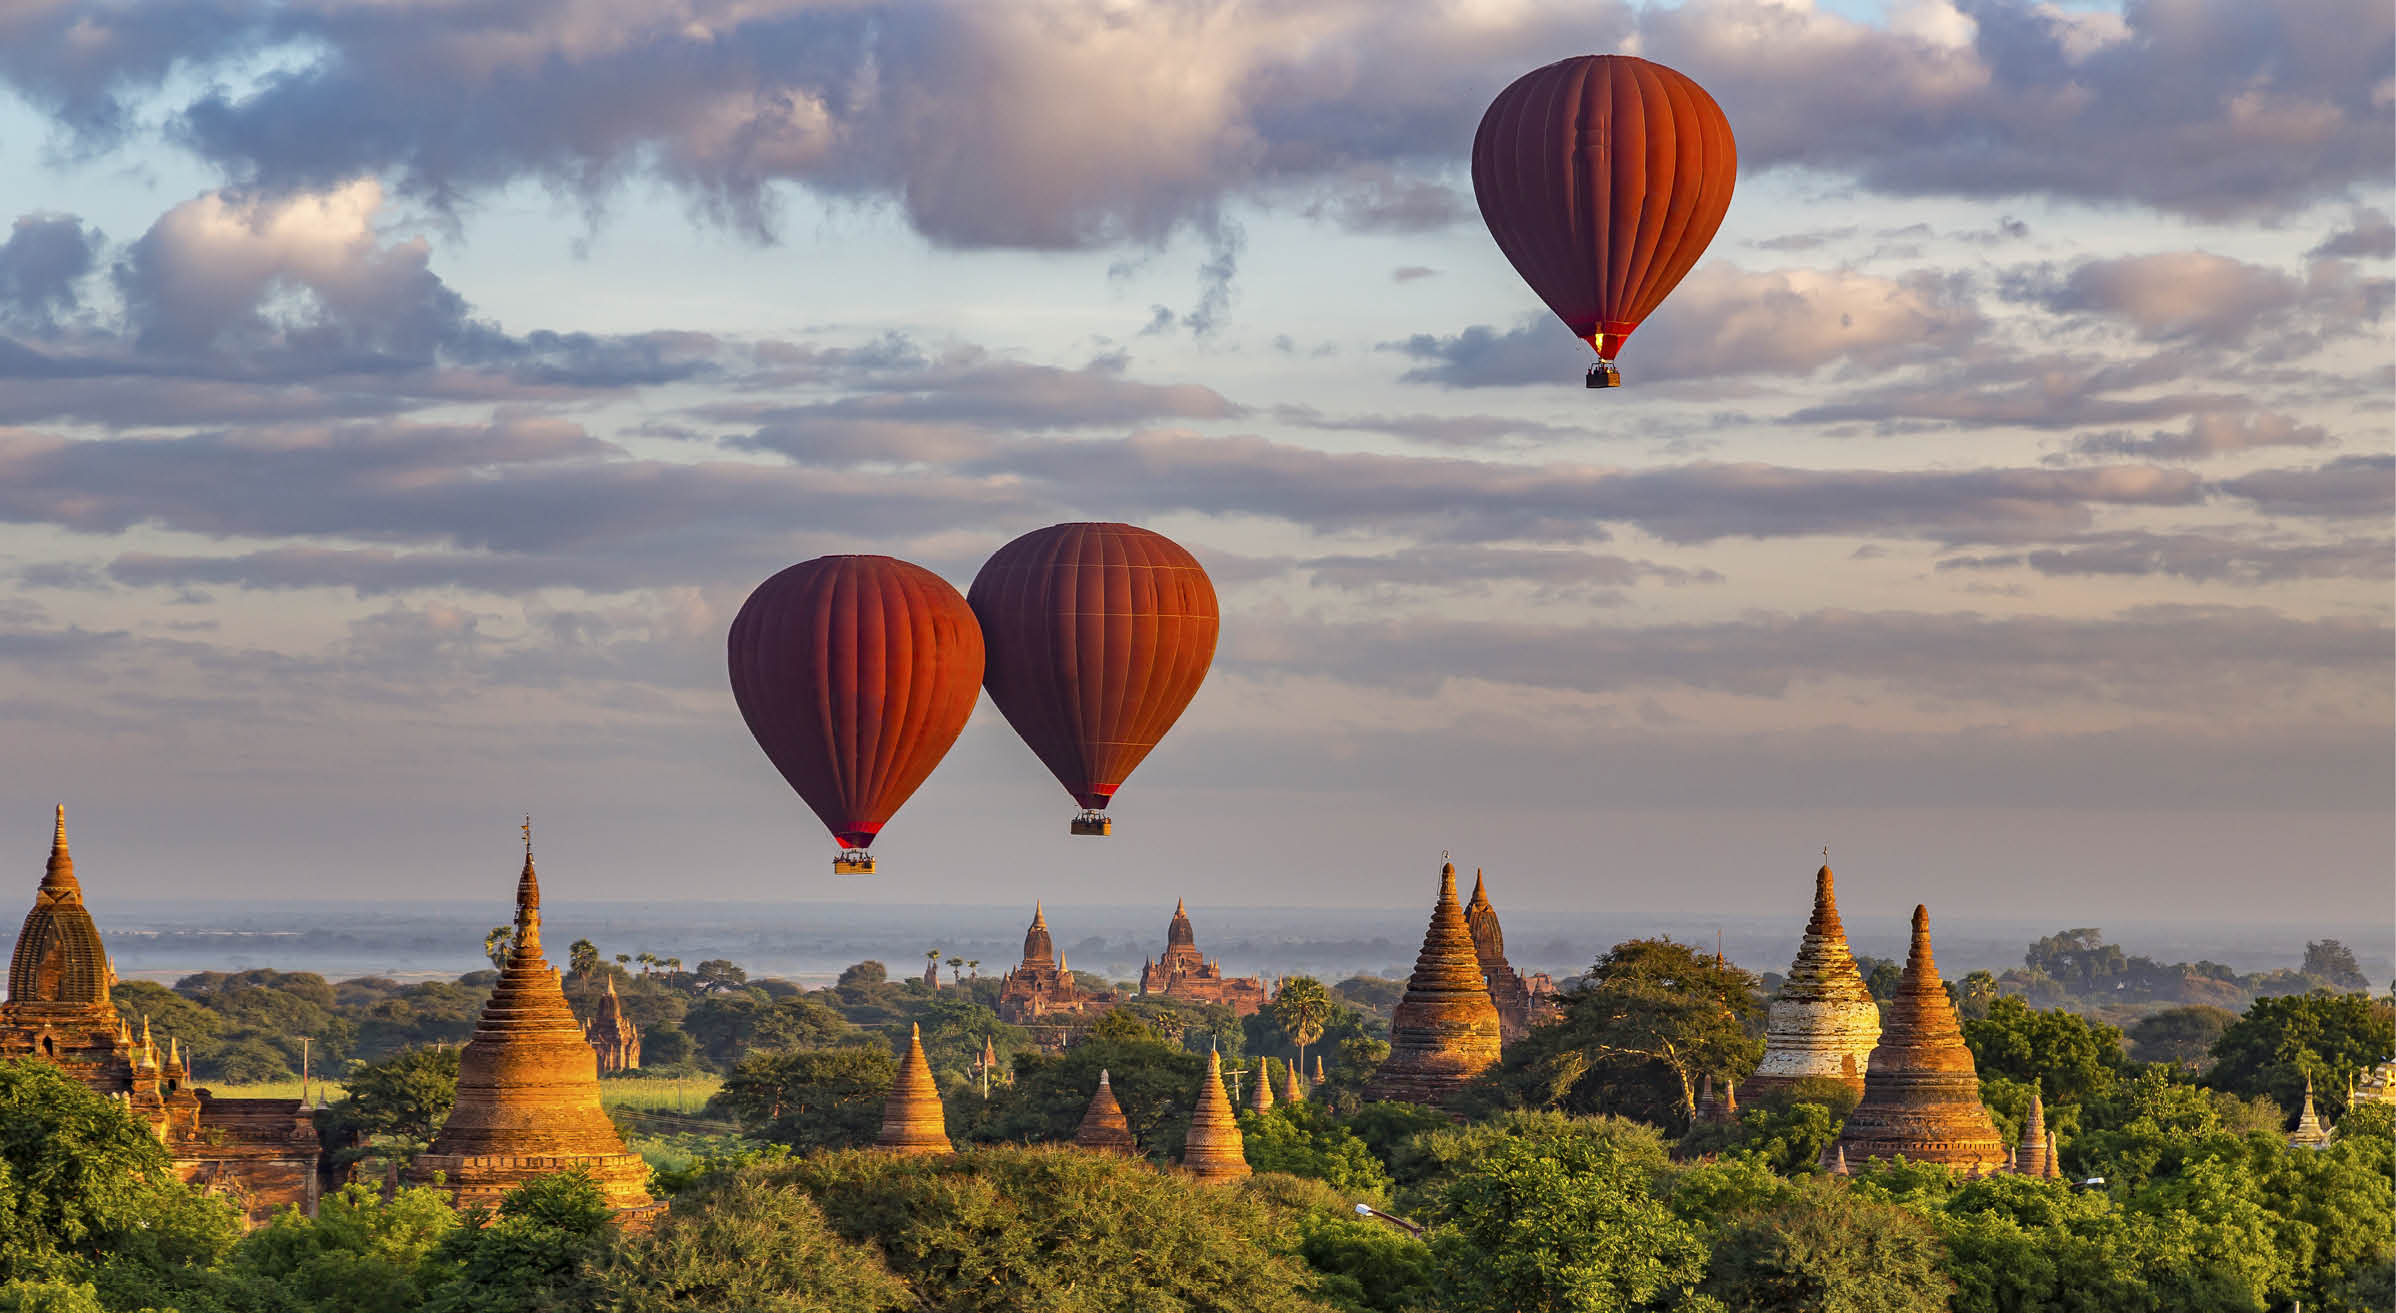 3 Red Hot Air Balloons above colorful ancient temples at Sunrise in Bagan, Myanmar